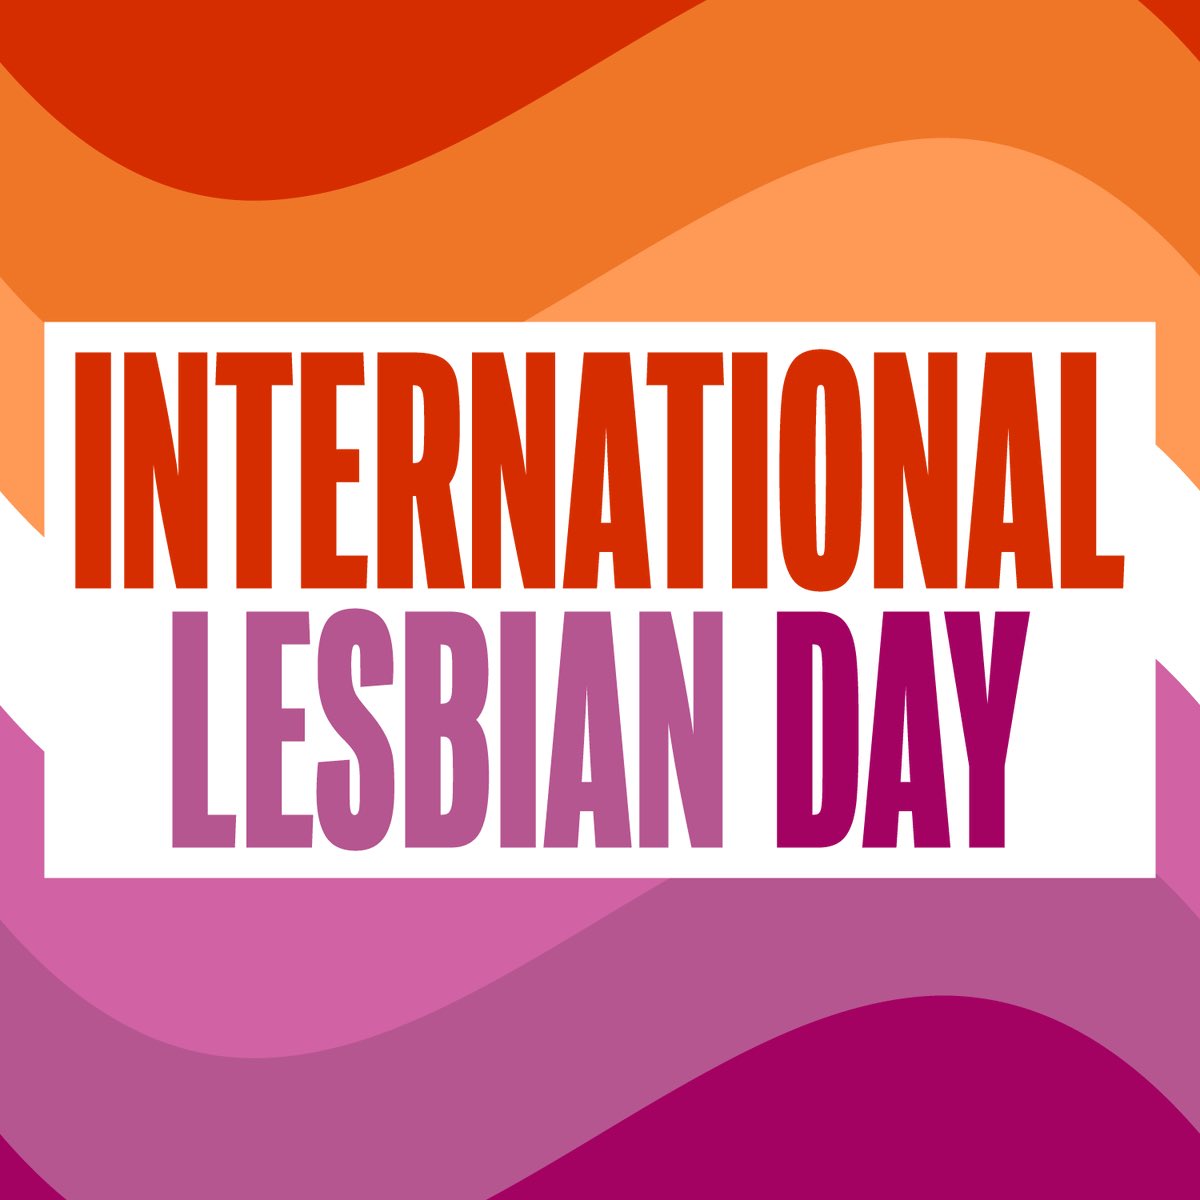 Happy #internationallesbianday to lesbians here and all around the world.